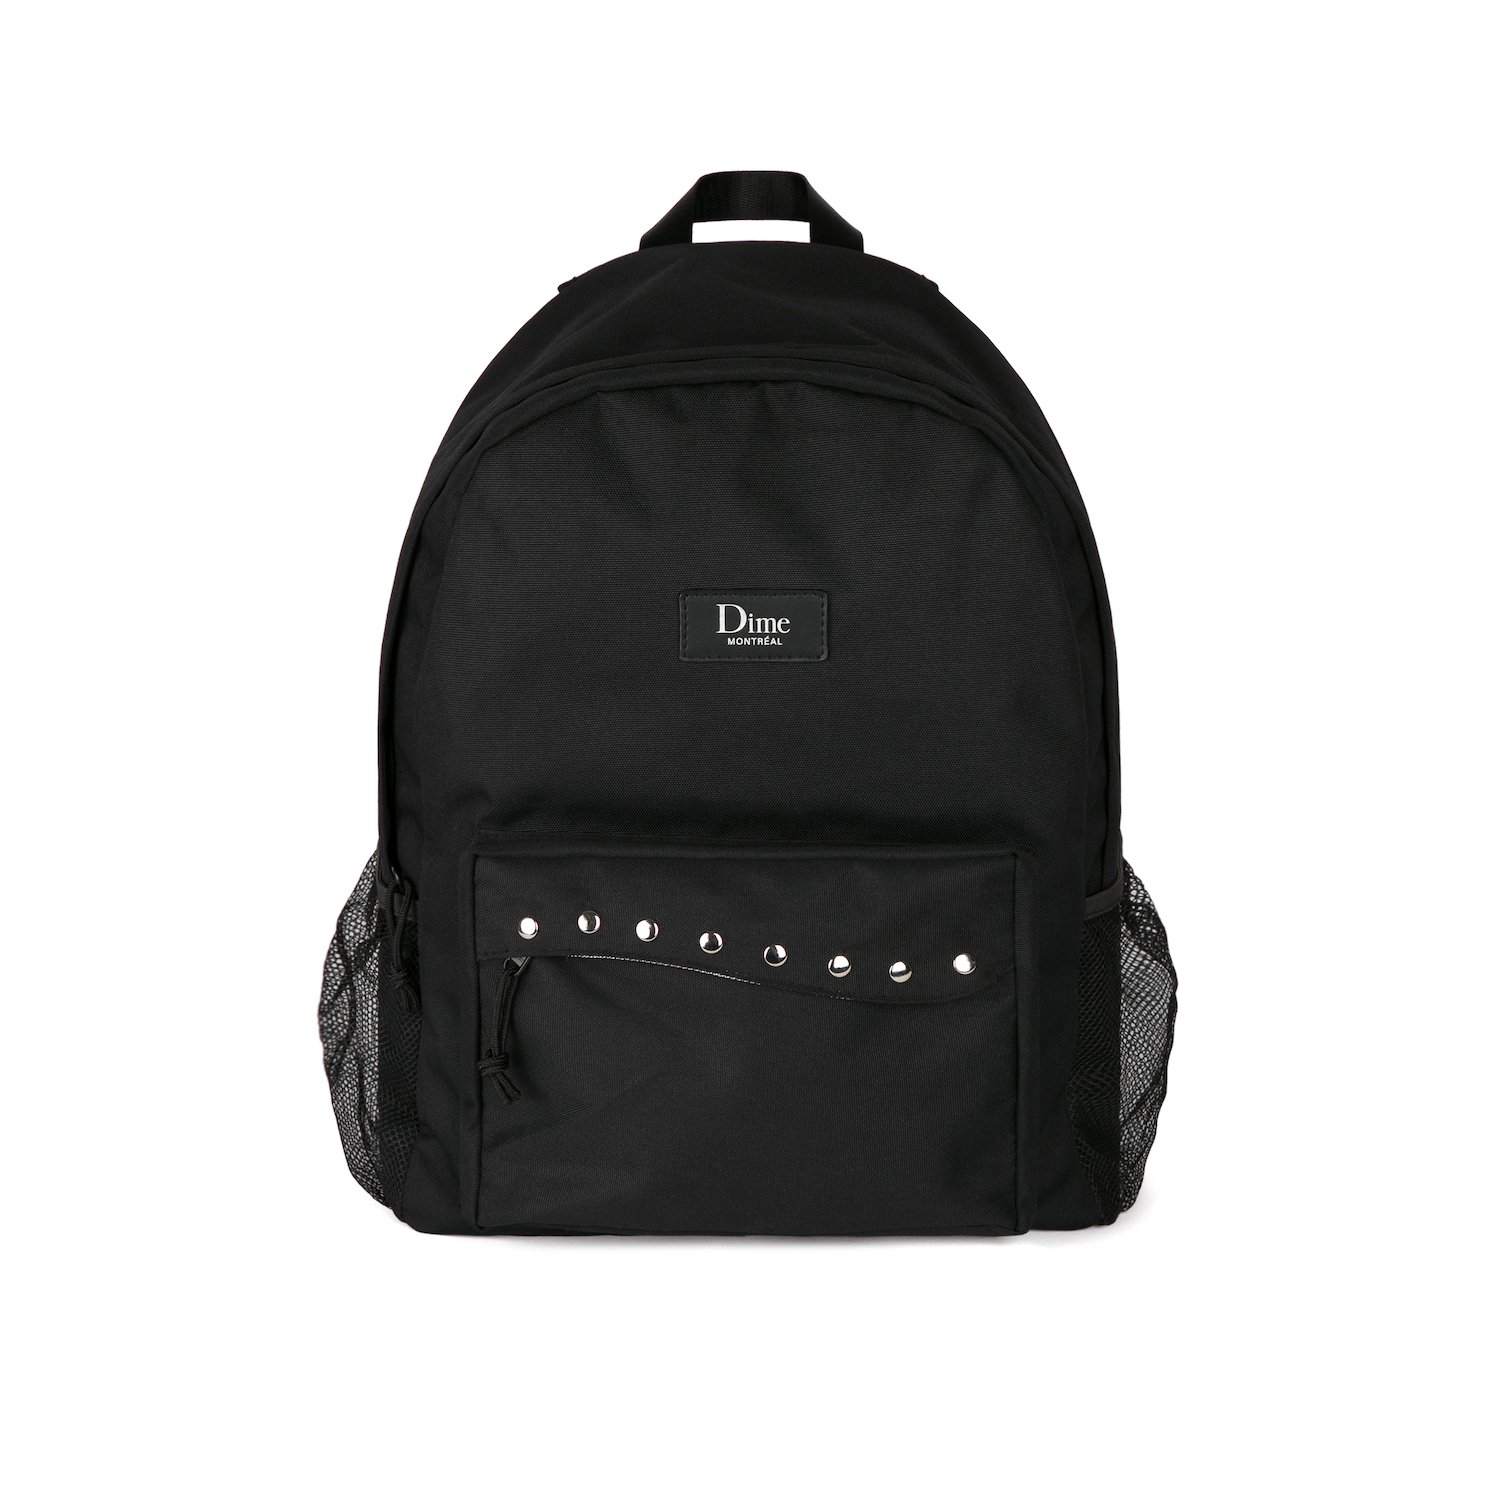 DIME<br>CLASSIC STUDDED BACKPACK<br>